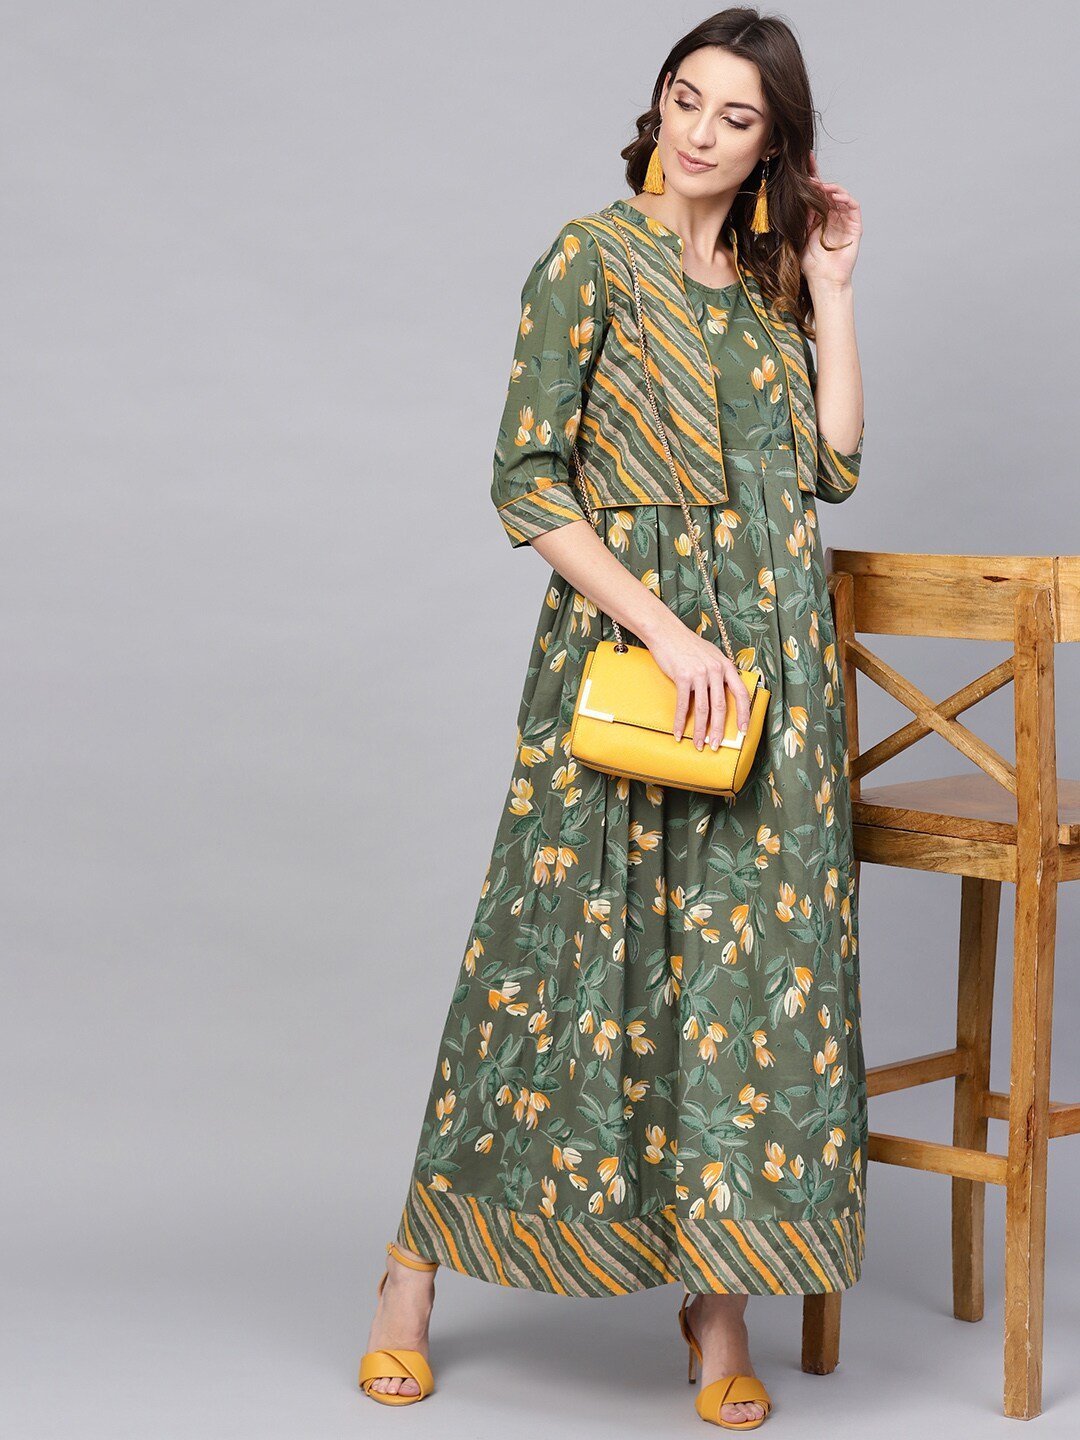 Women's  Green & Yellow Floral Printed Maxi Dress with Ethnic Jacket - AKS